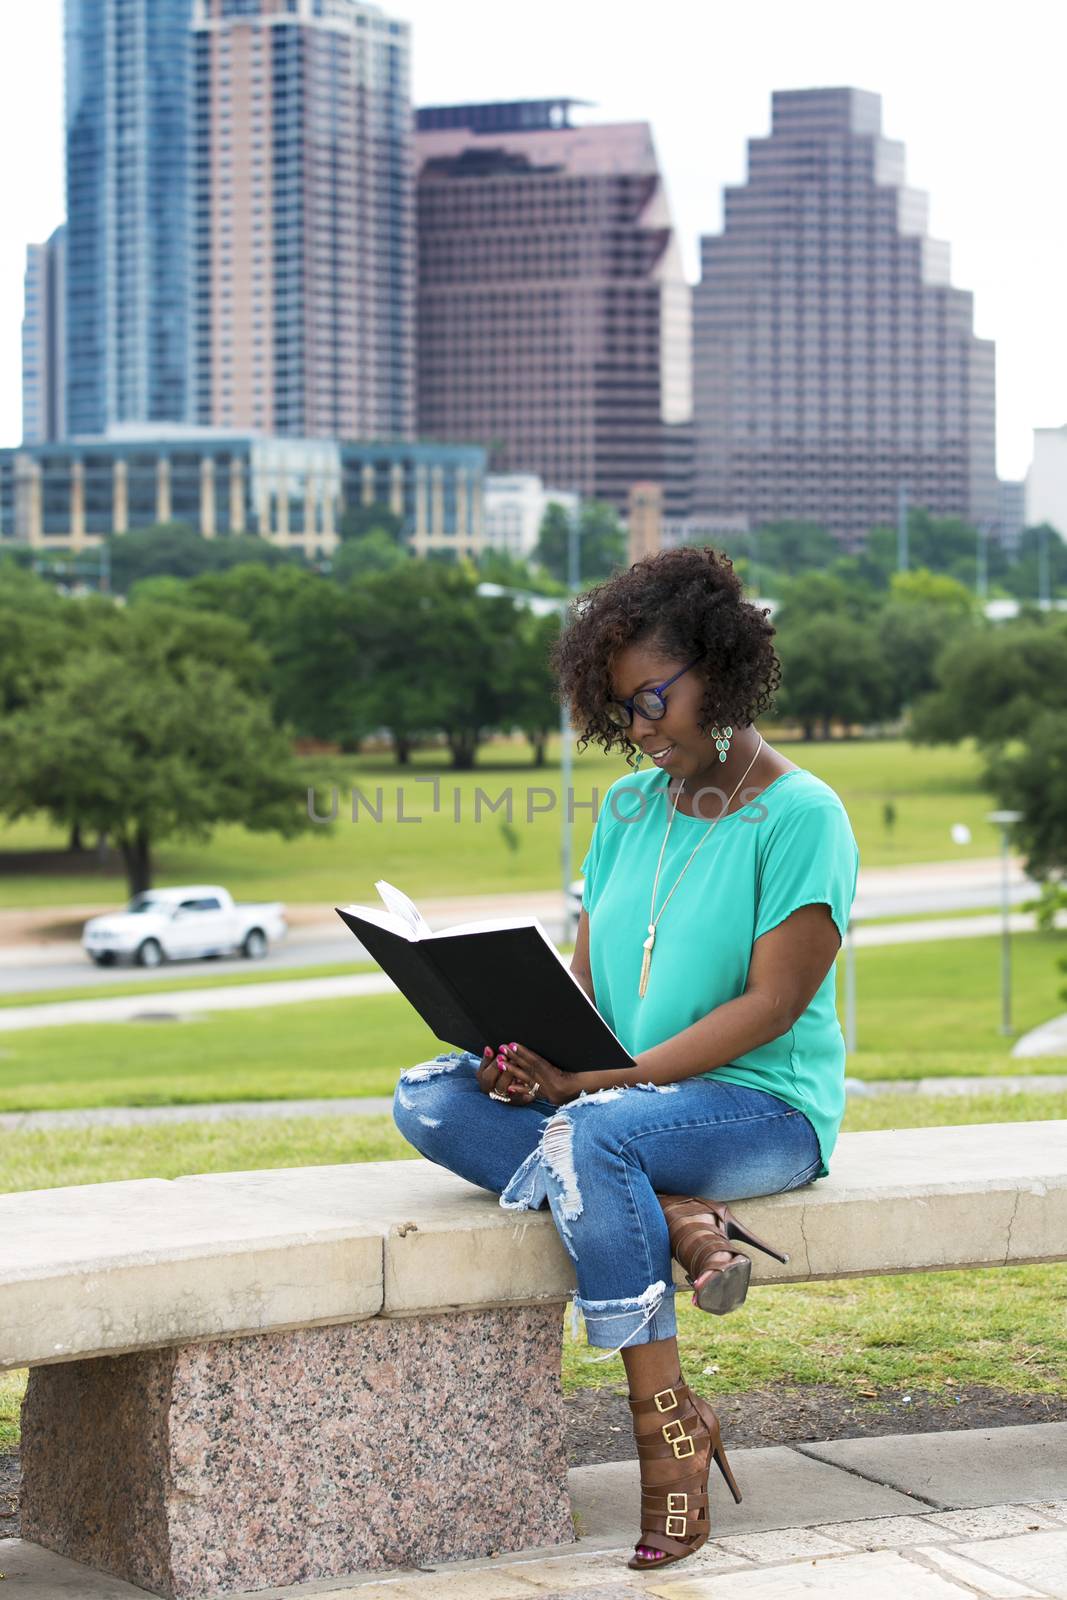 Beautiful African American woman reading a book, Austin, Texas background